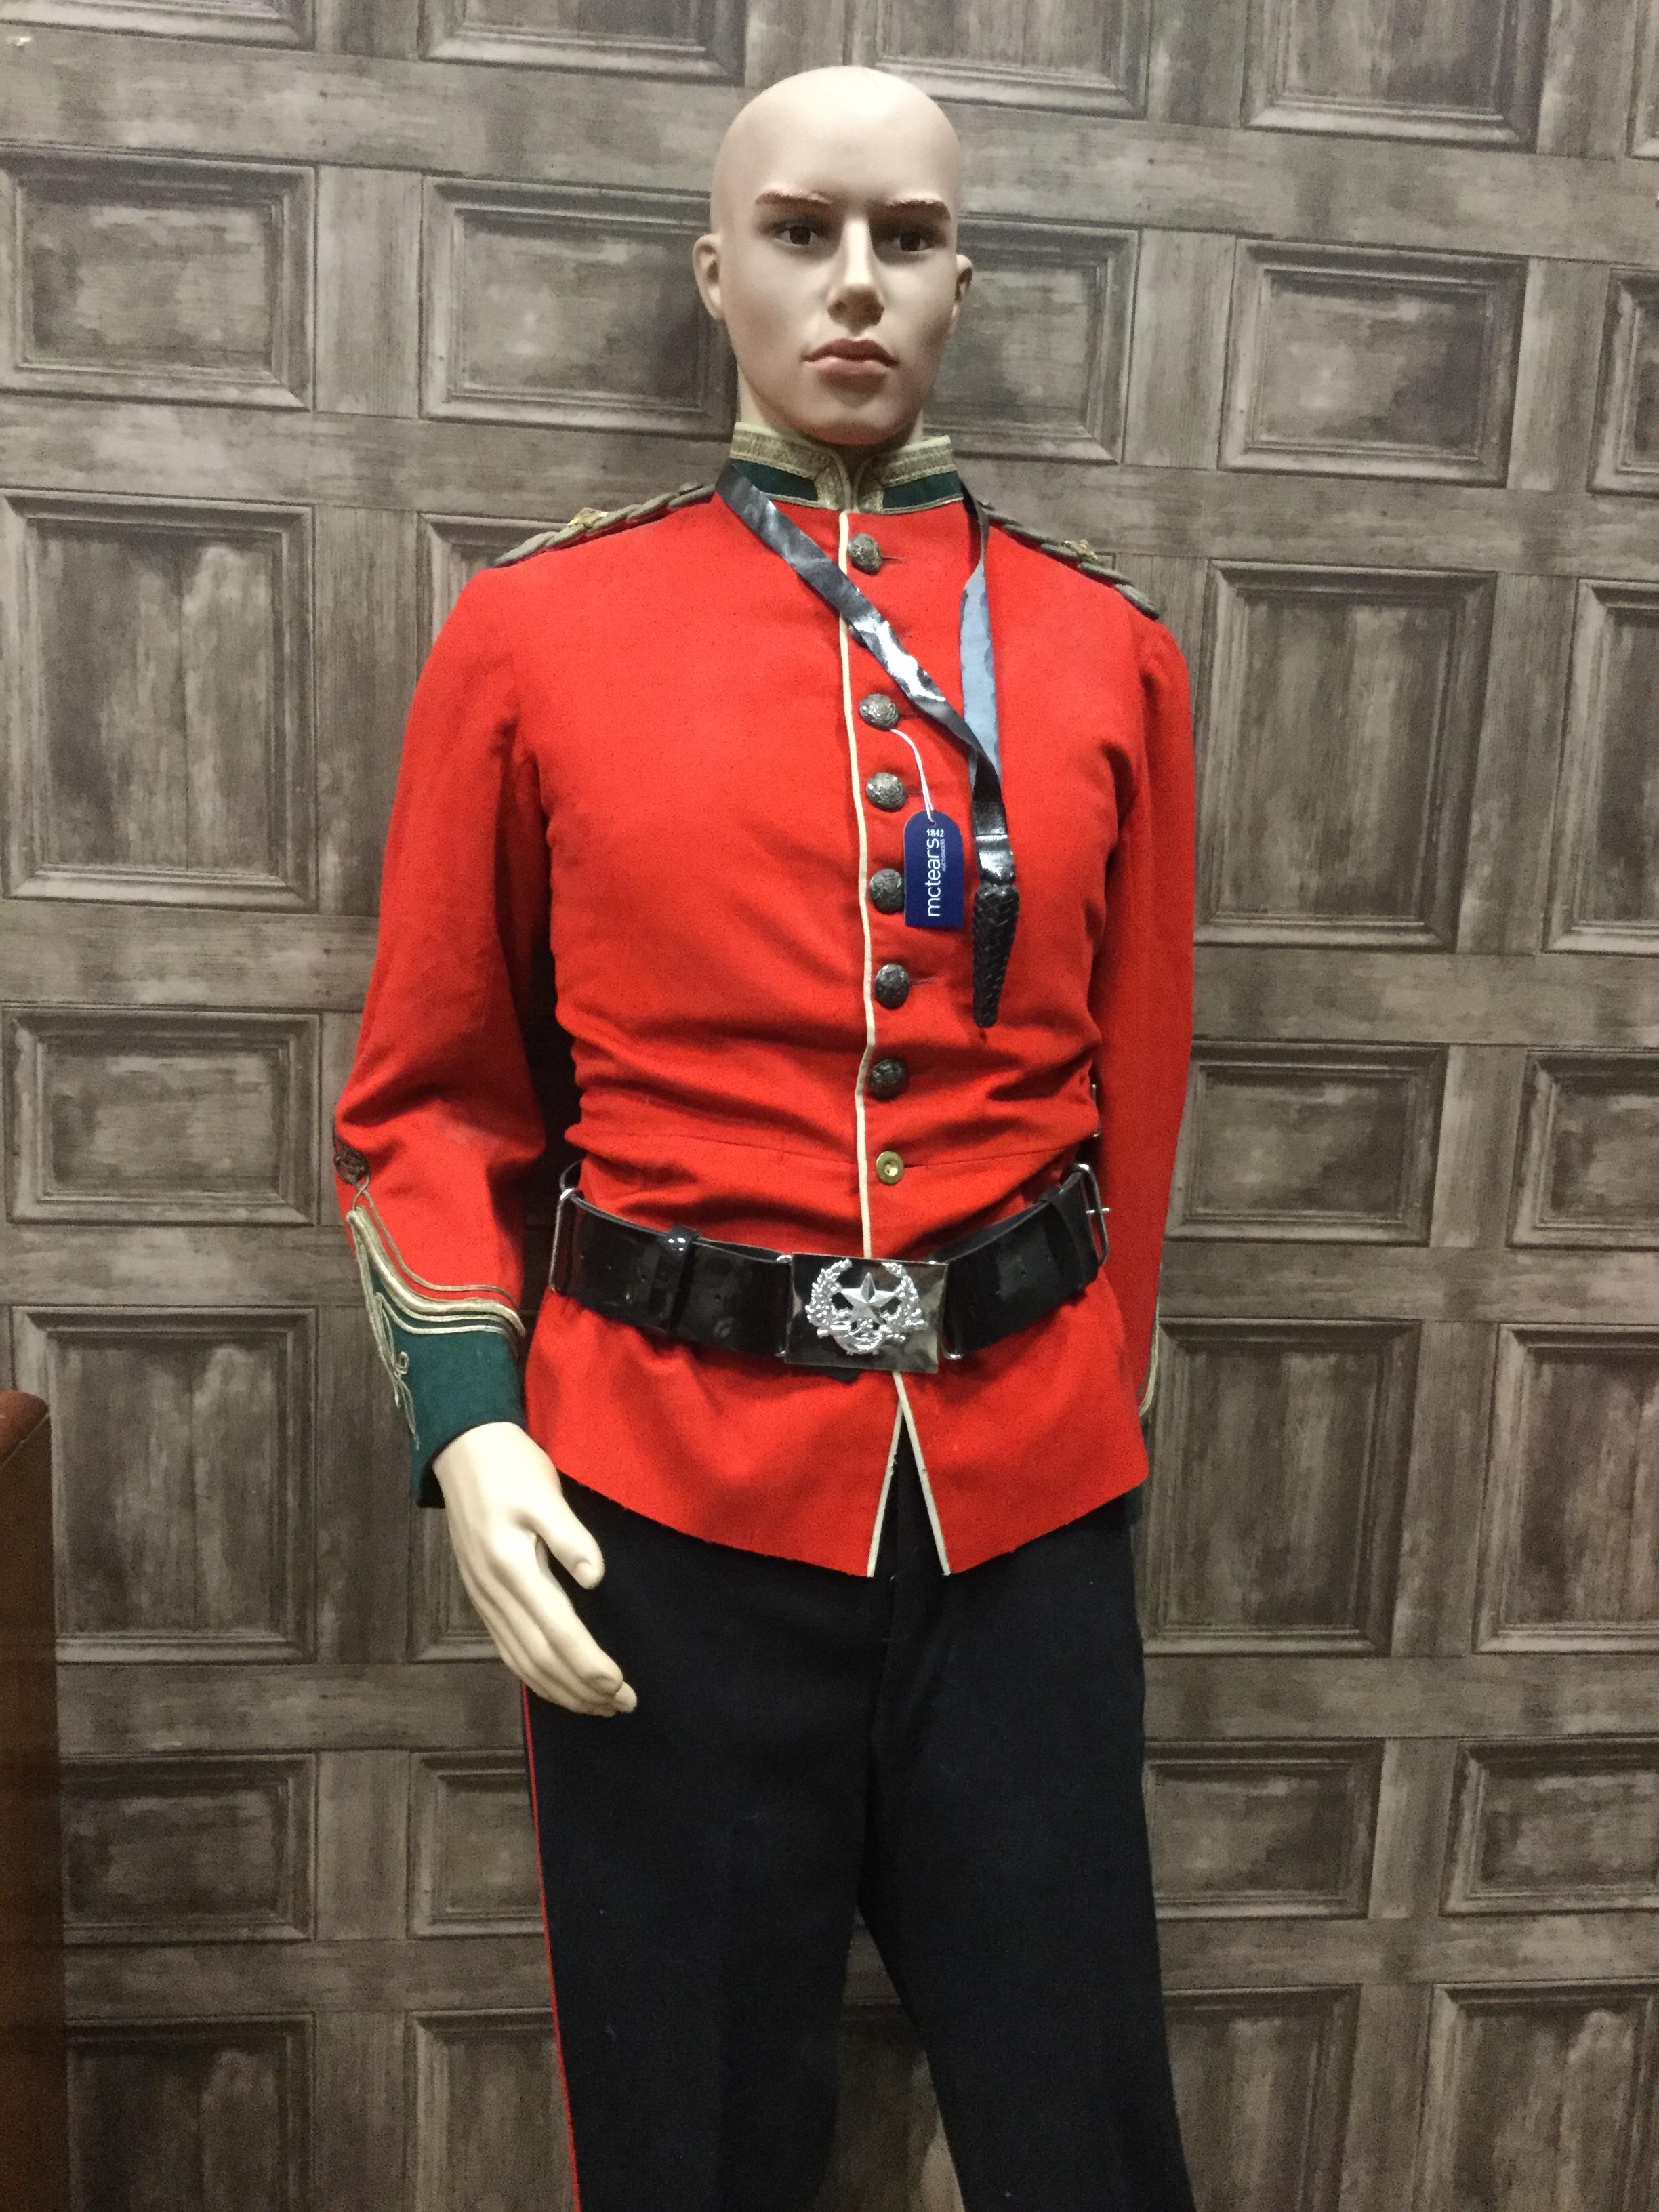 A MODERN MANNEQUIN IN MILITARY DRESS AND ANOTHER